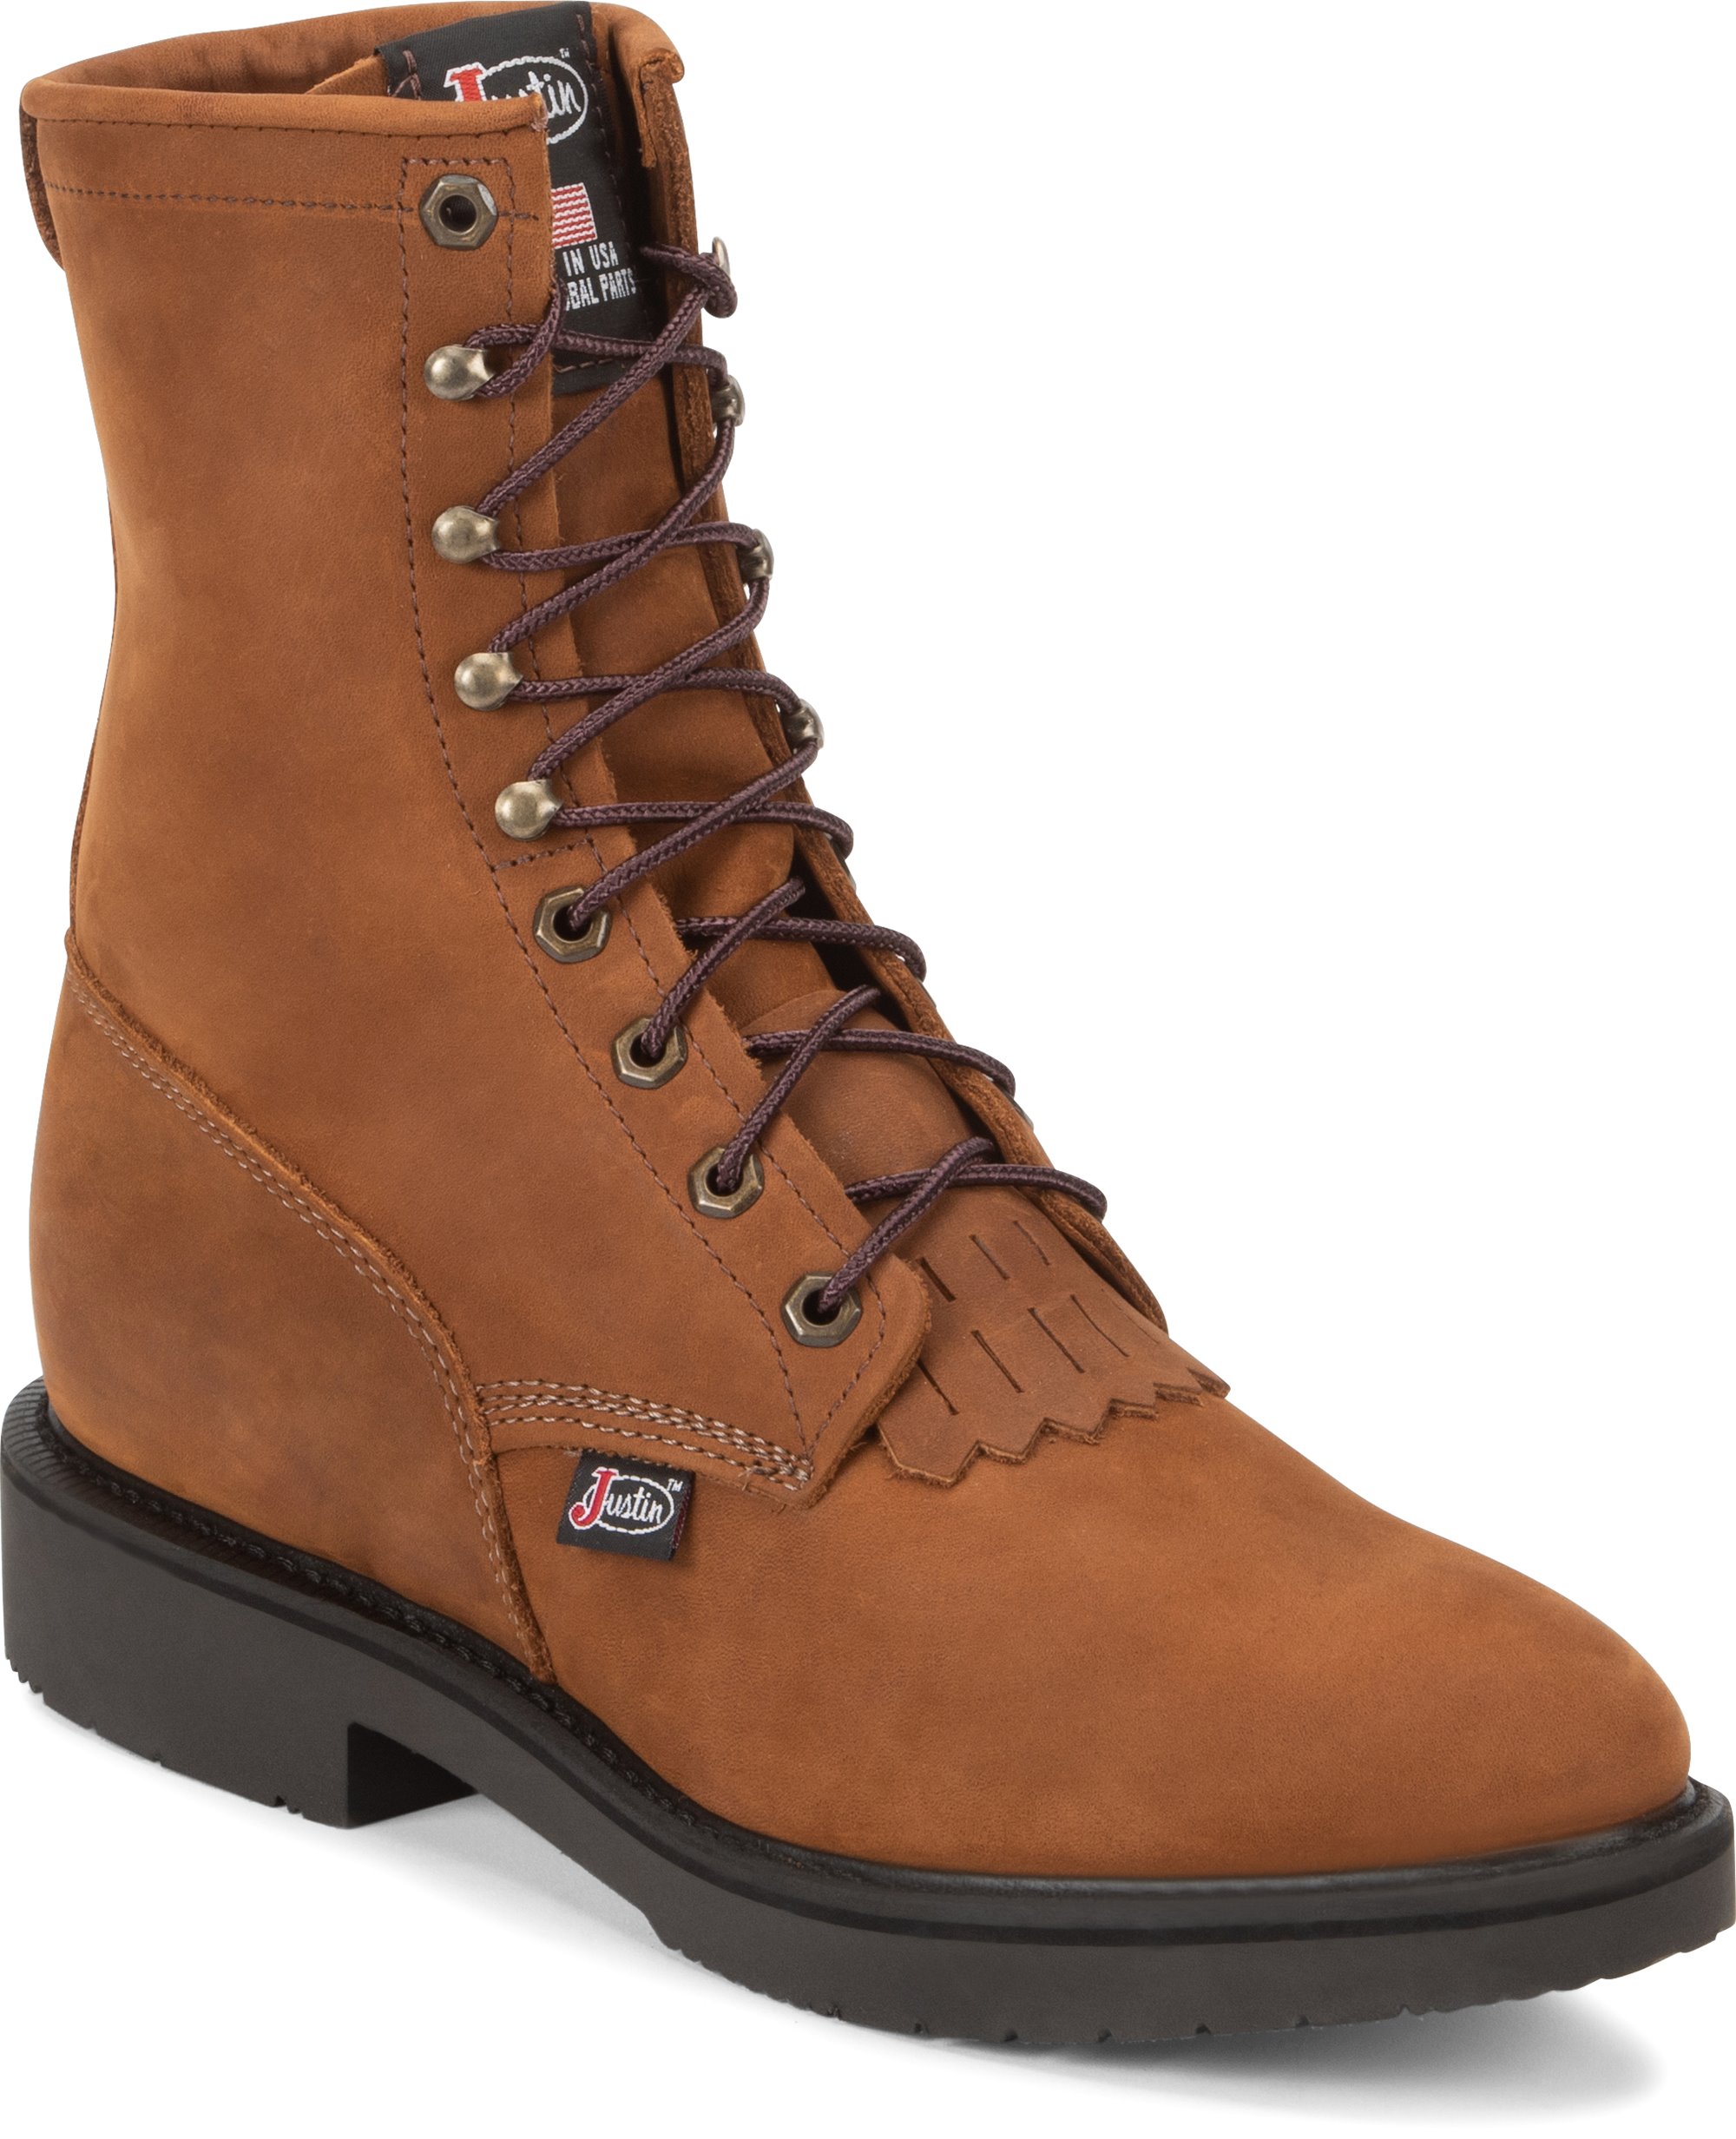 justin work boots style 760